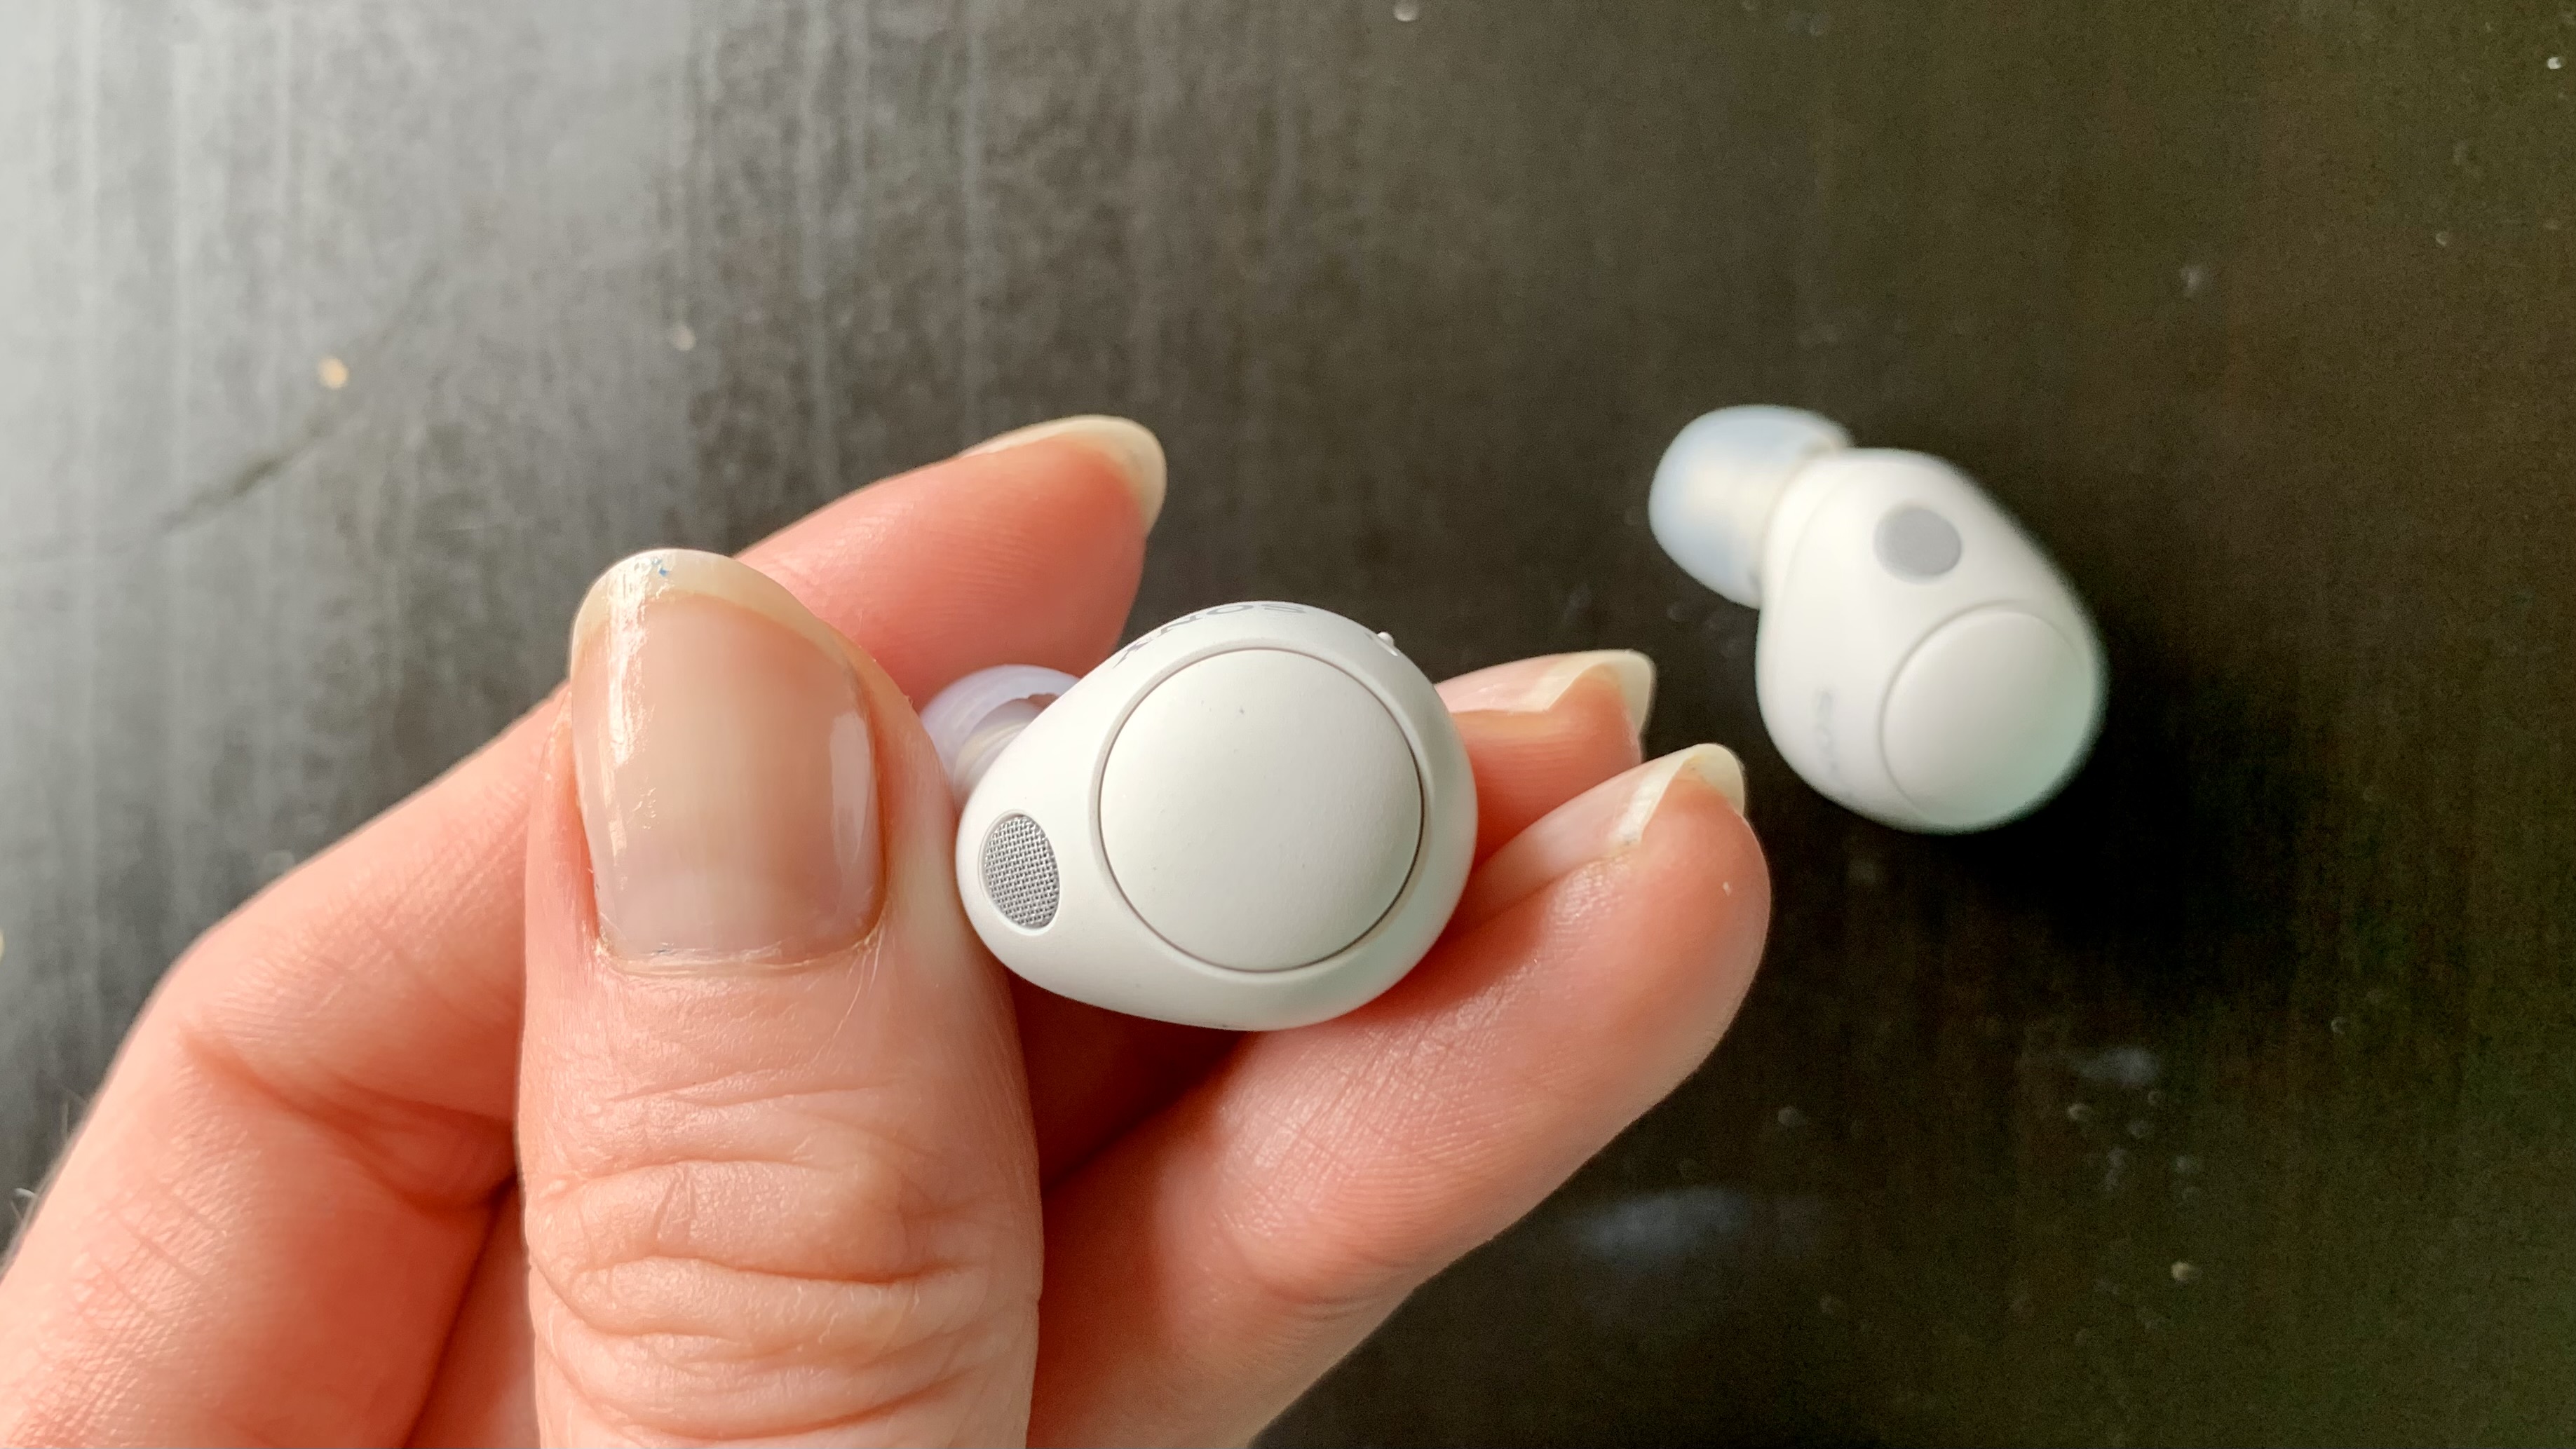 Sony WF-C700N earbuds close-up in a hand, on gray background